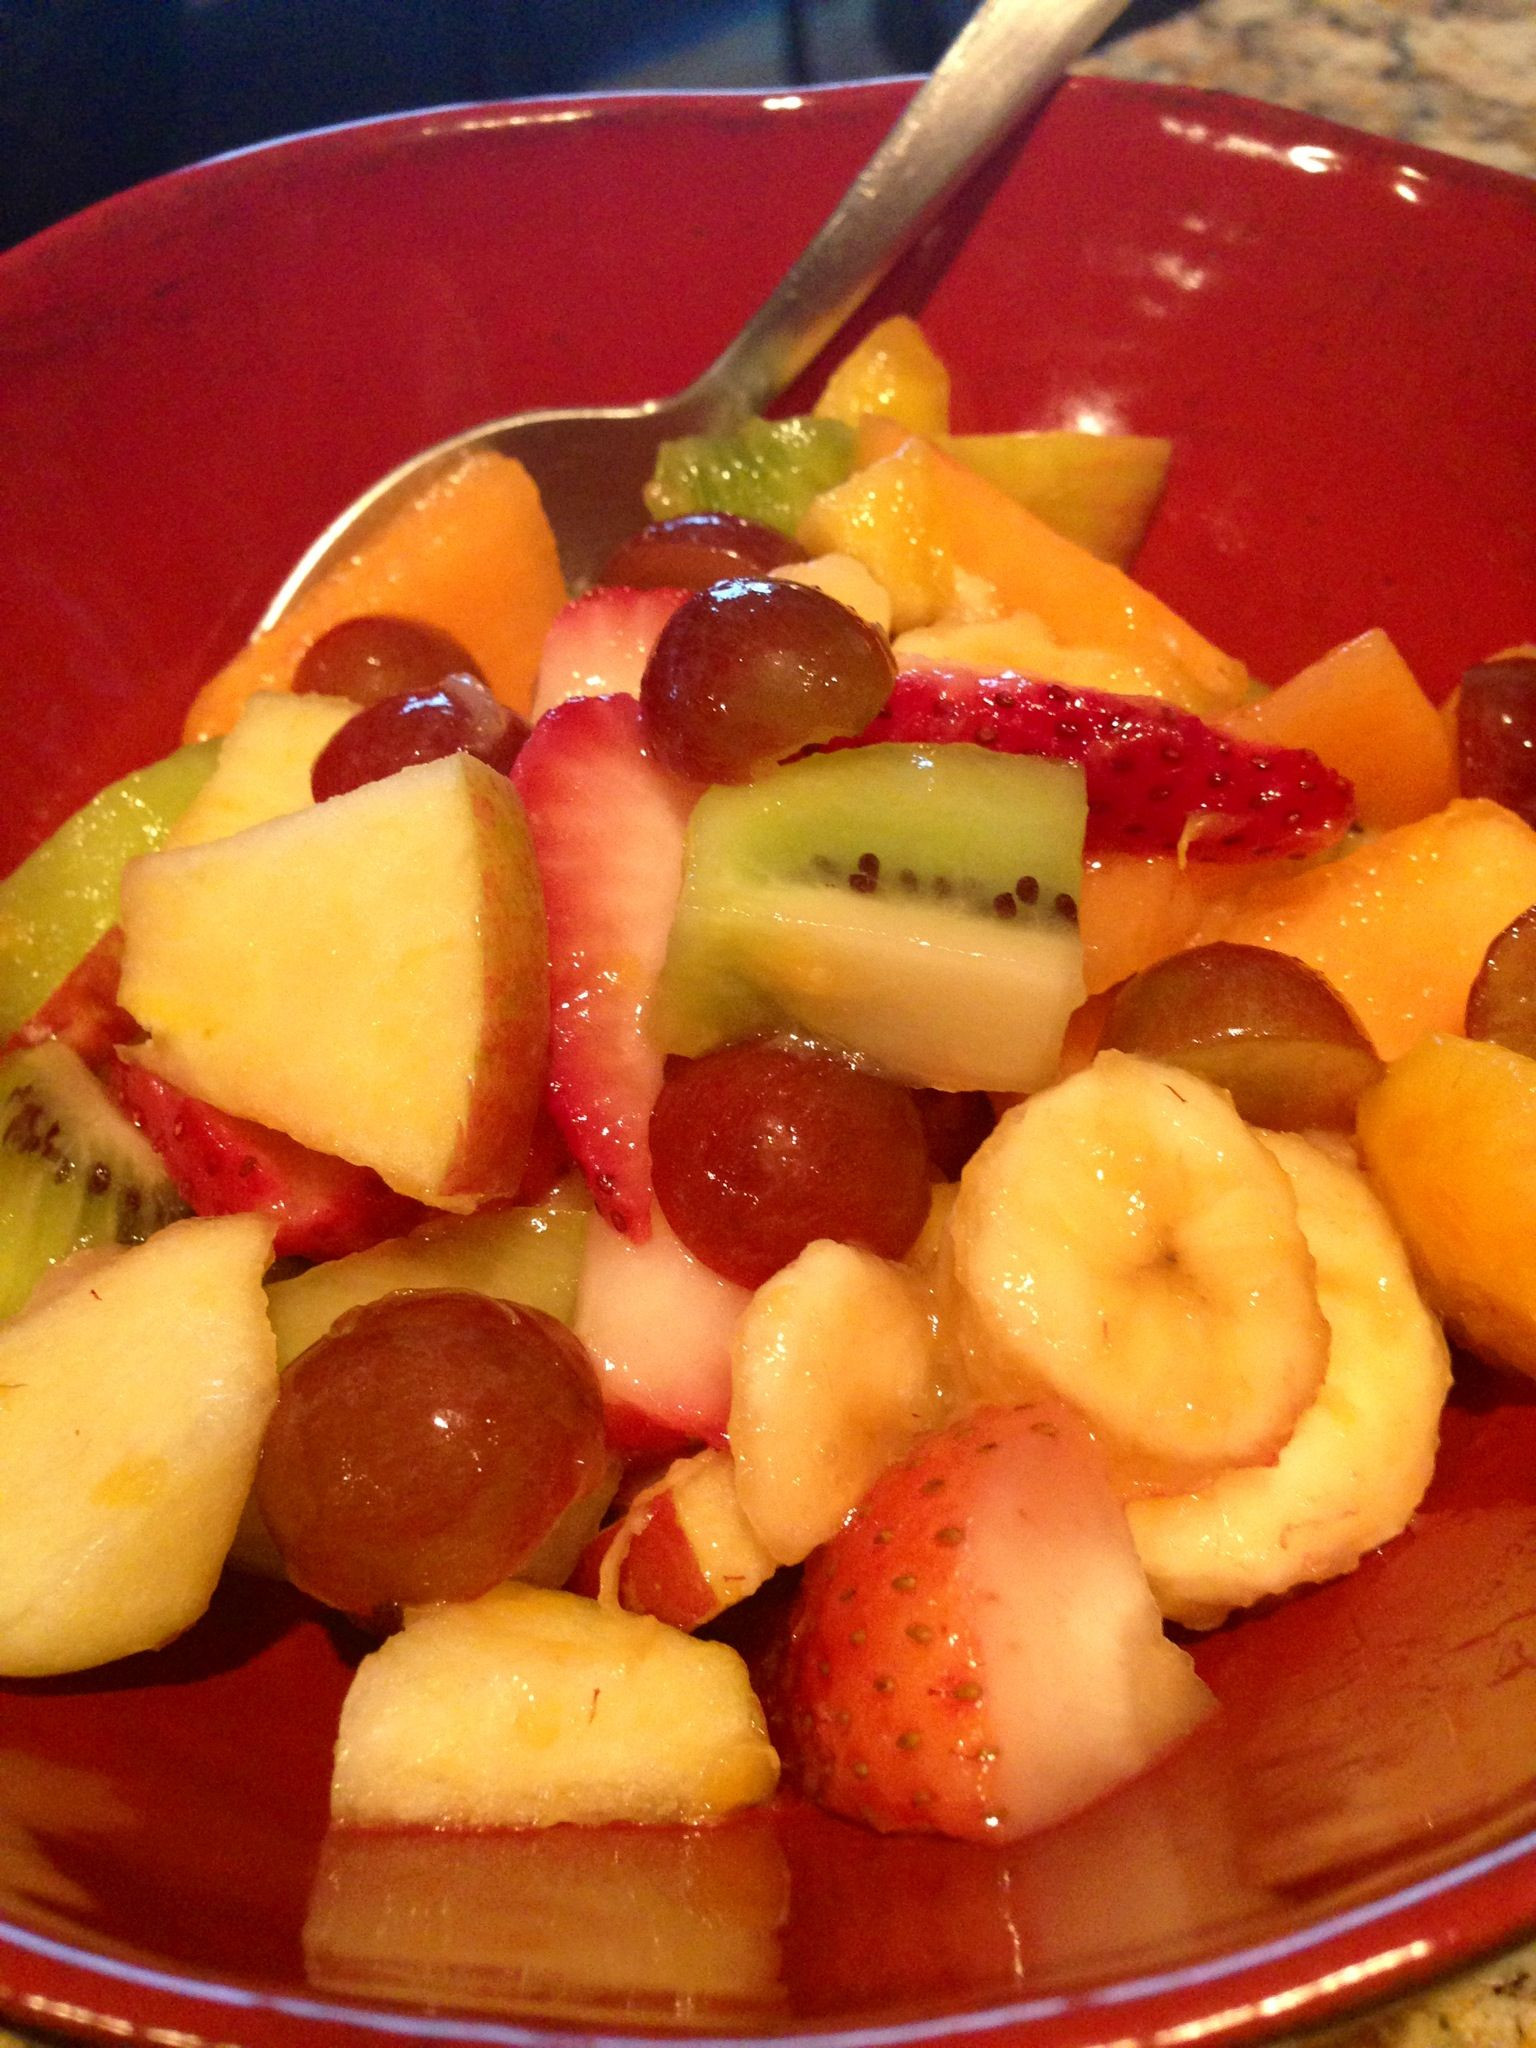 Fruit Salads For Easter Brunch
 Fresh fruit salad with a touch of orange juice to keep it